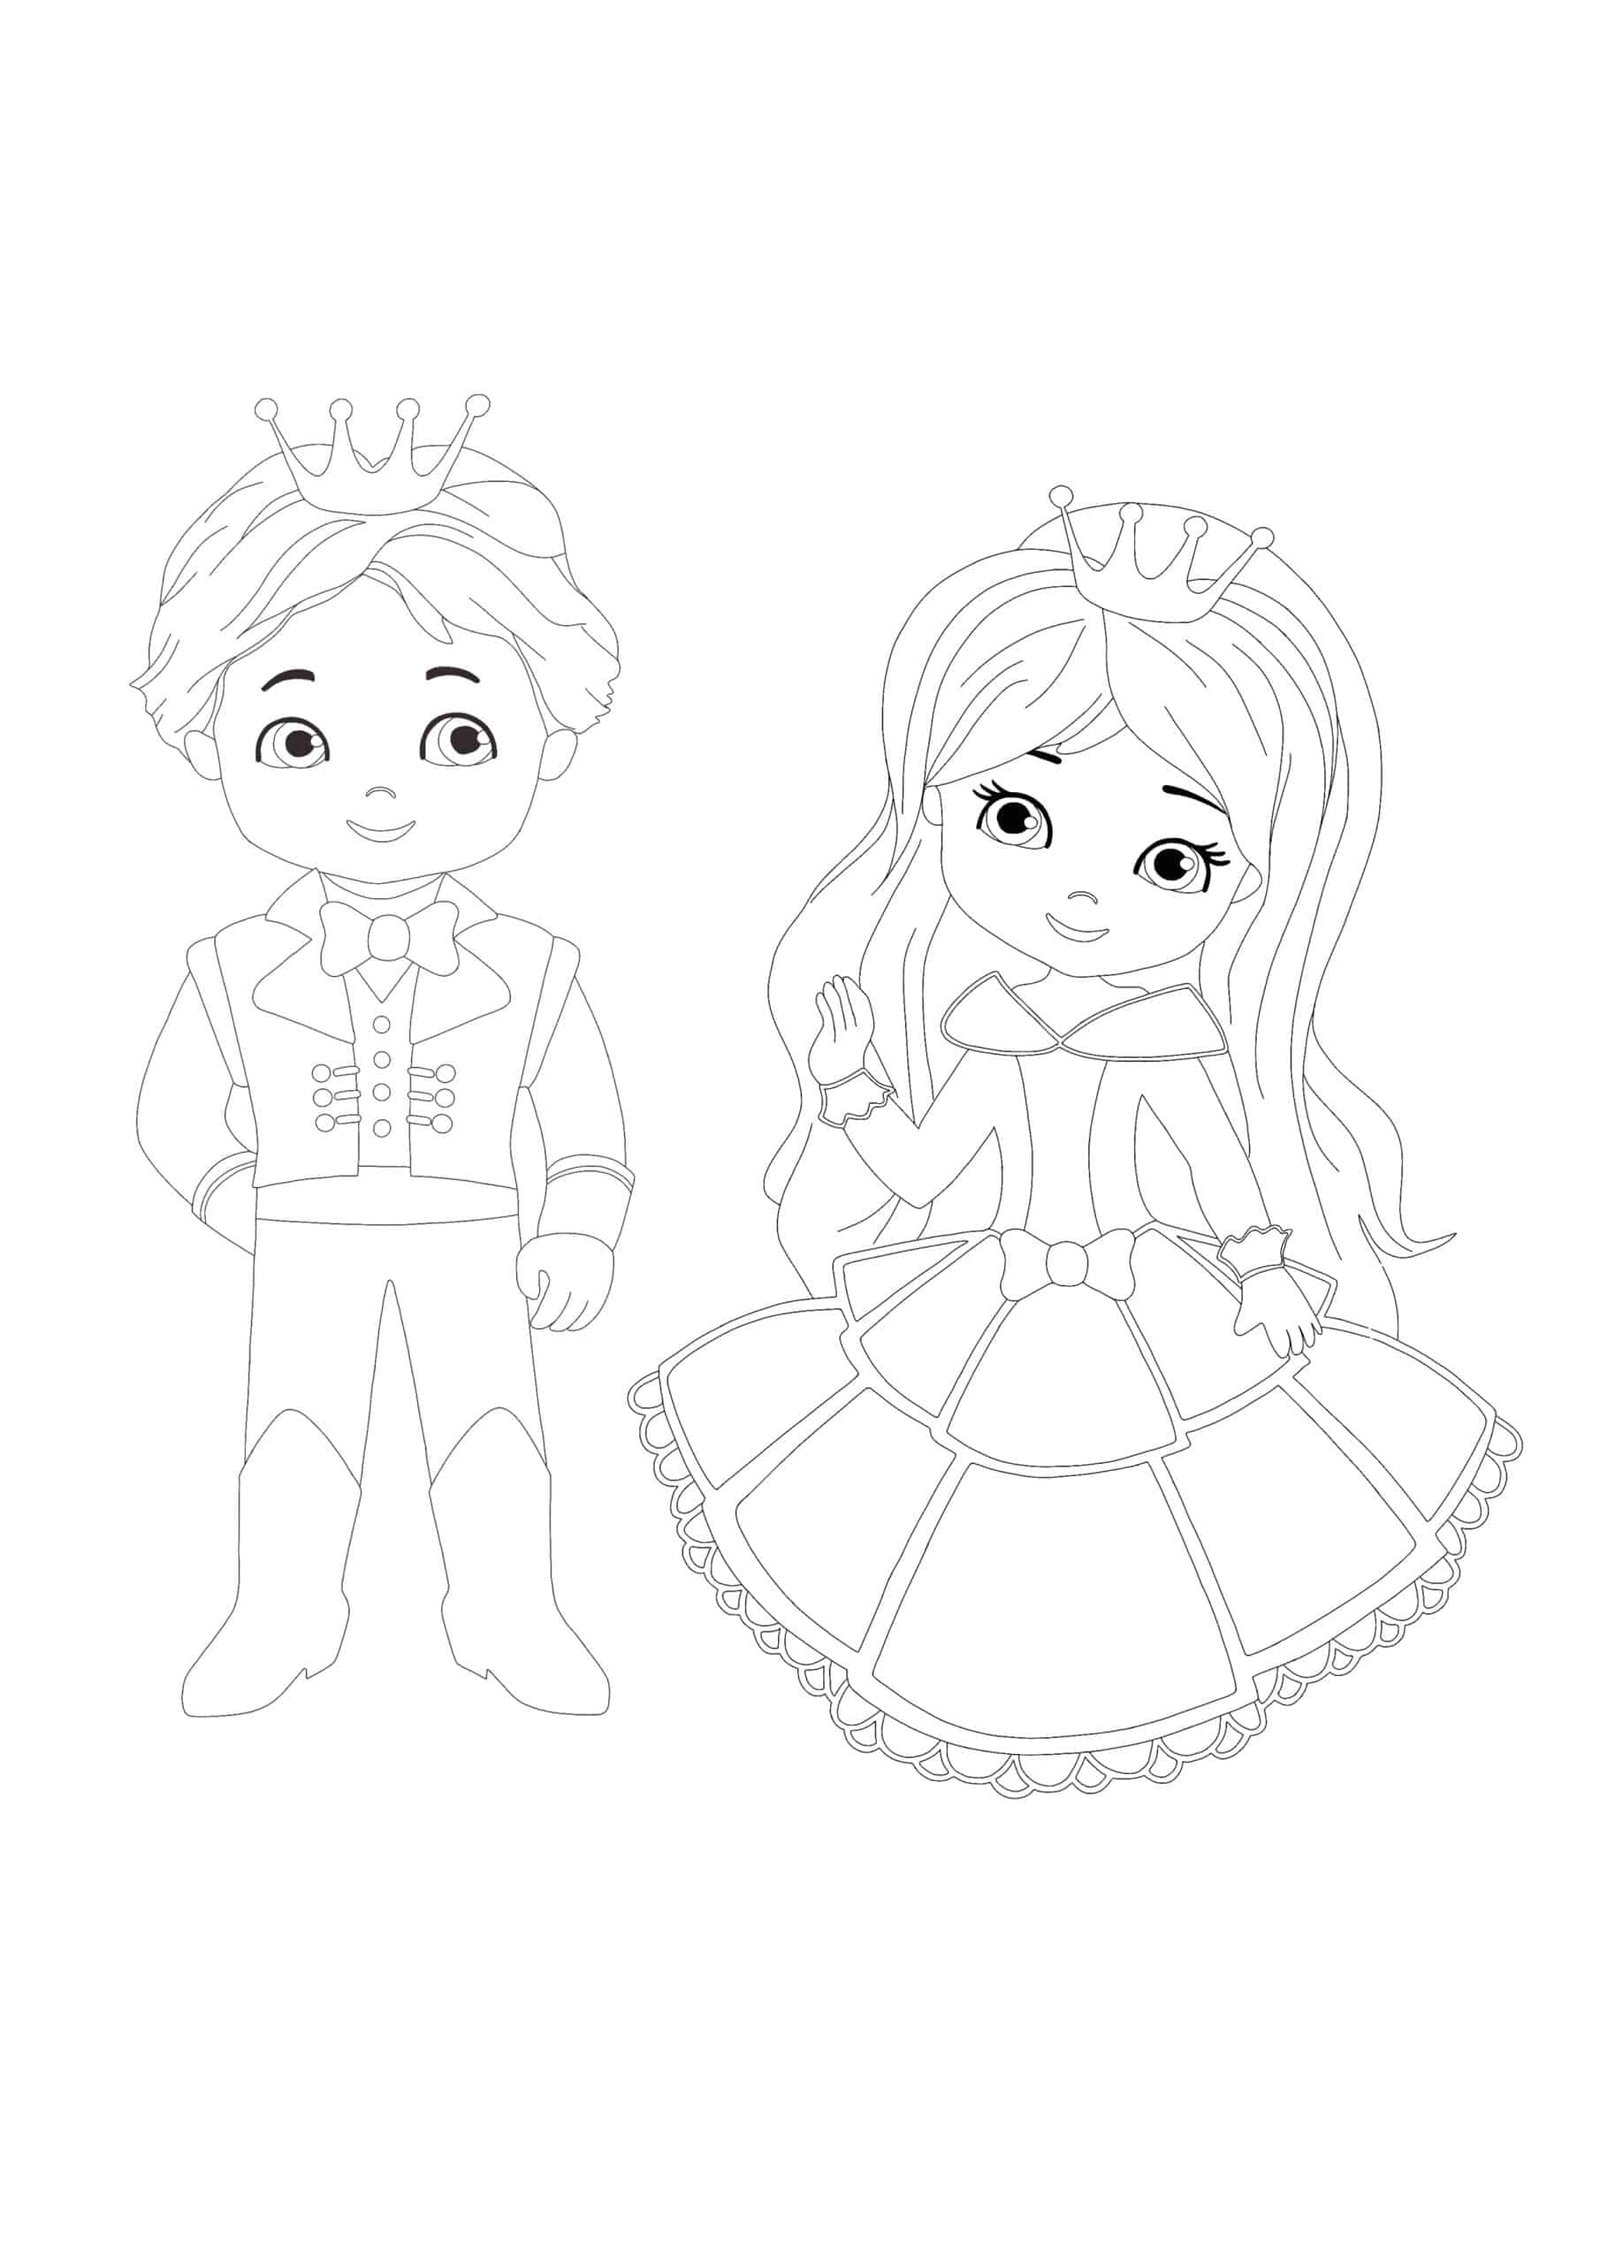 Cute Prince and Princess coloring page